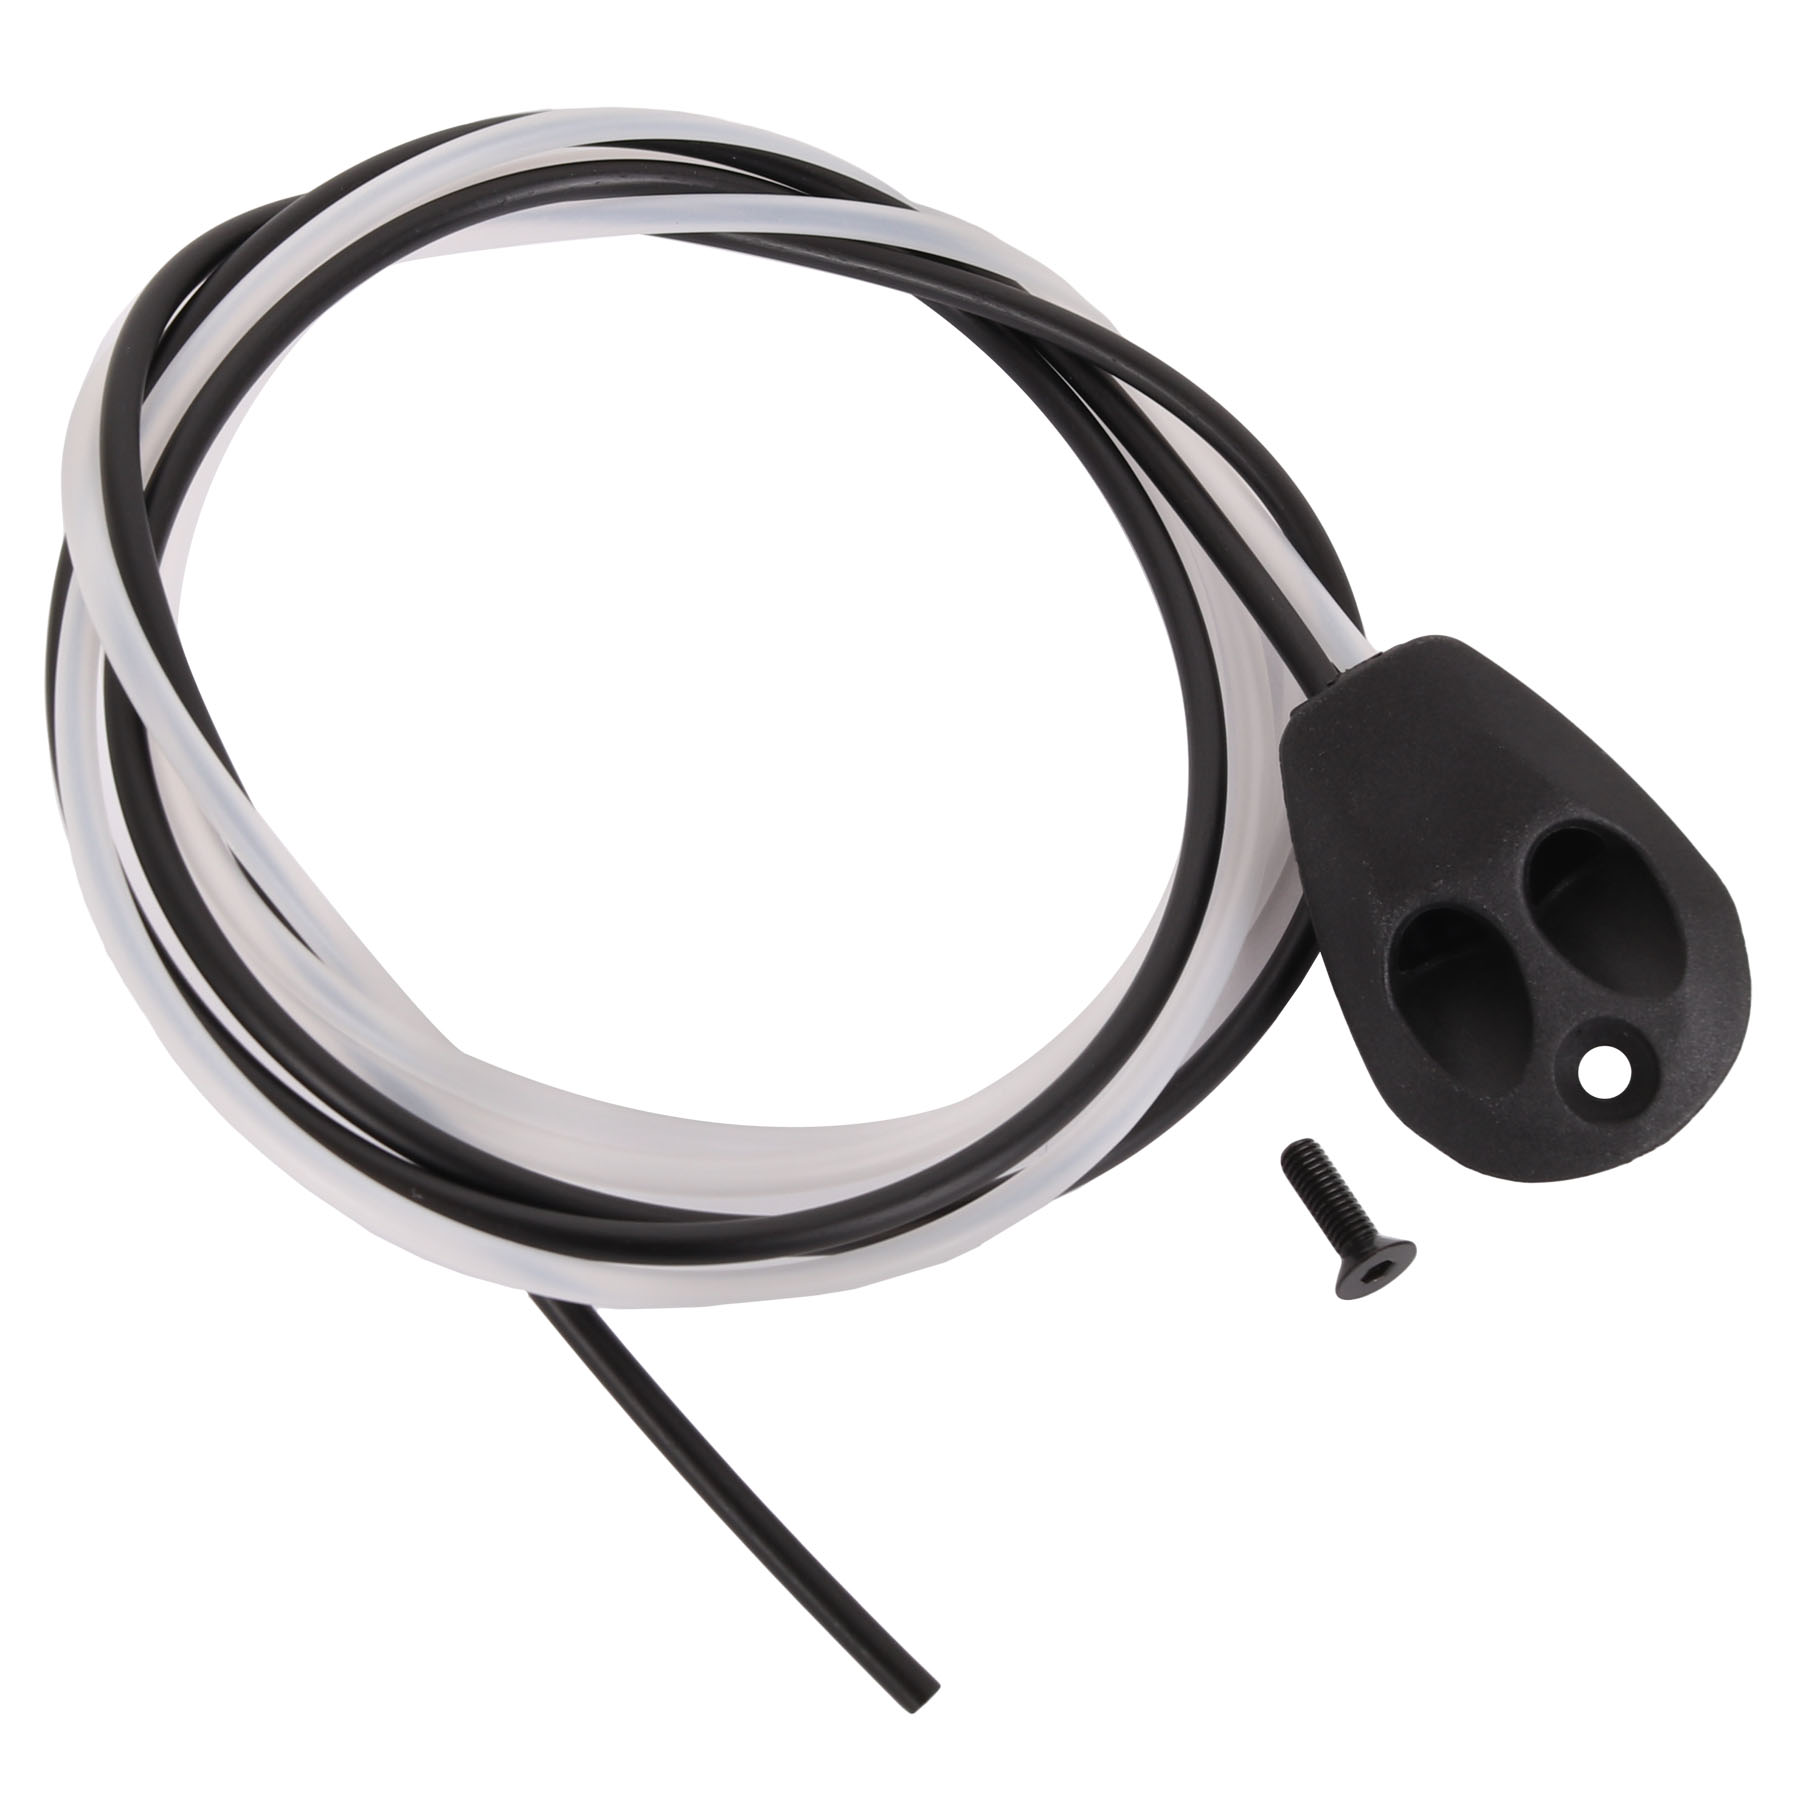 Picture of Giant Cable Stopper Kit - Downtube Attachment | for Brake/Shift Cables - TCR Advanced - 1471-CBLSTPM-001